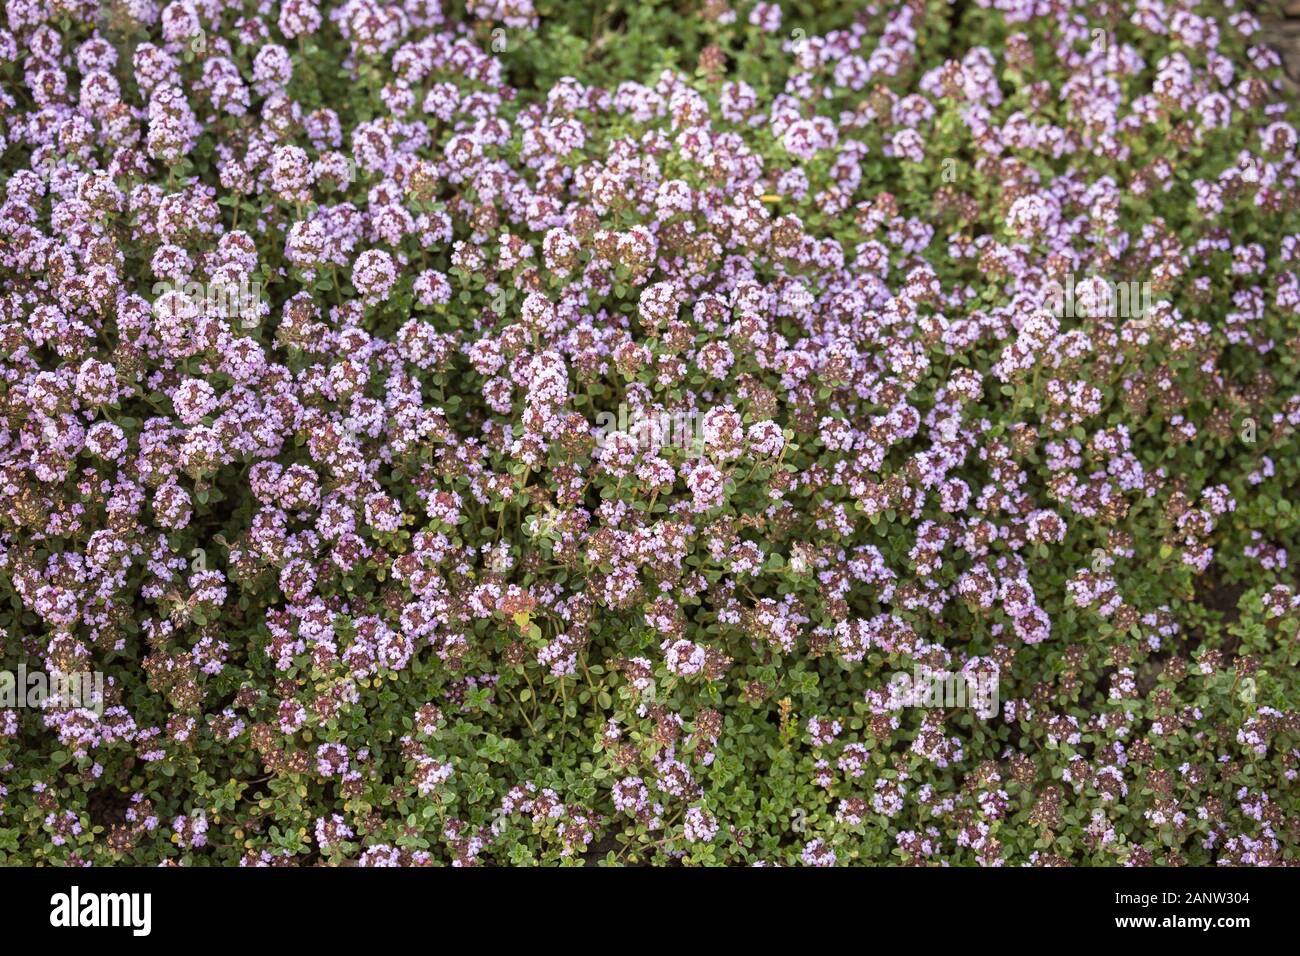 Blooming Thymus citriodorus (lemon thyme or citrus thyme) in garden. Natural floral background Stock Photo